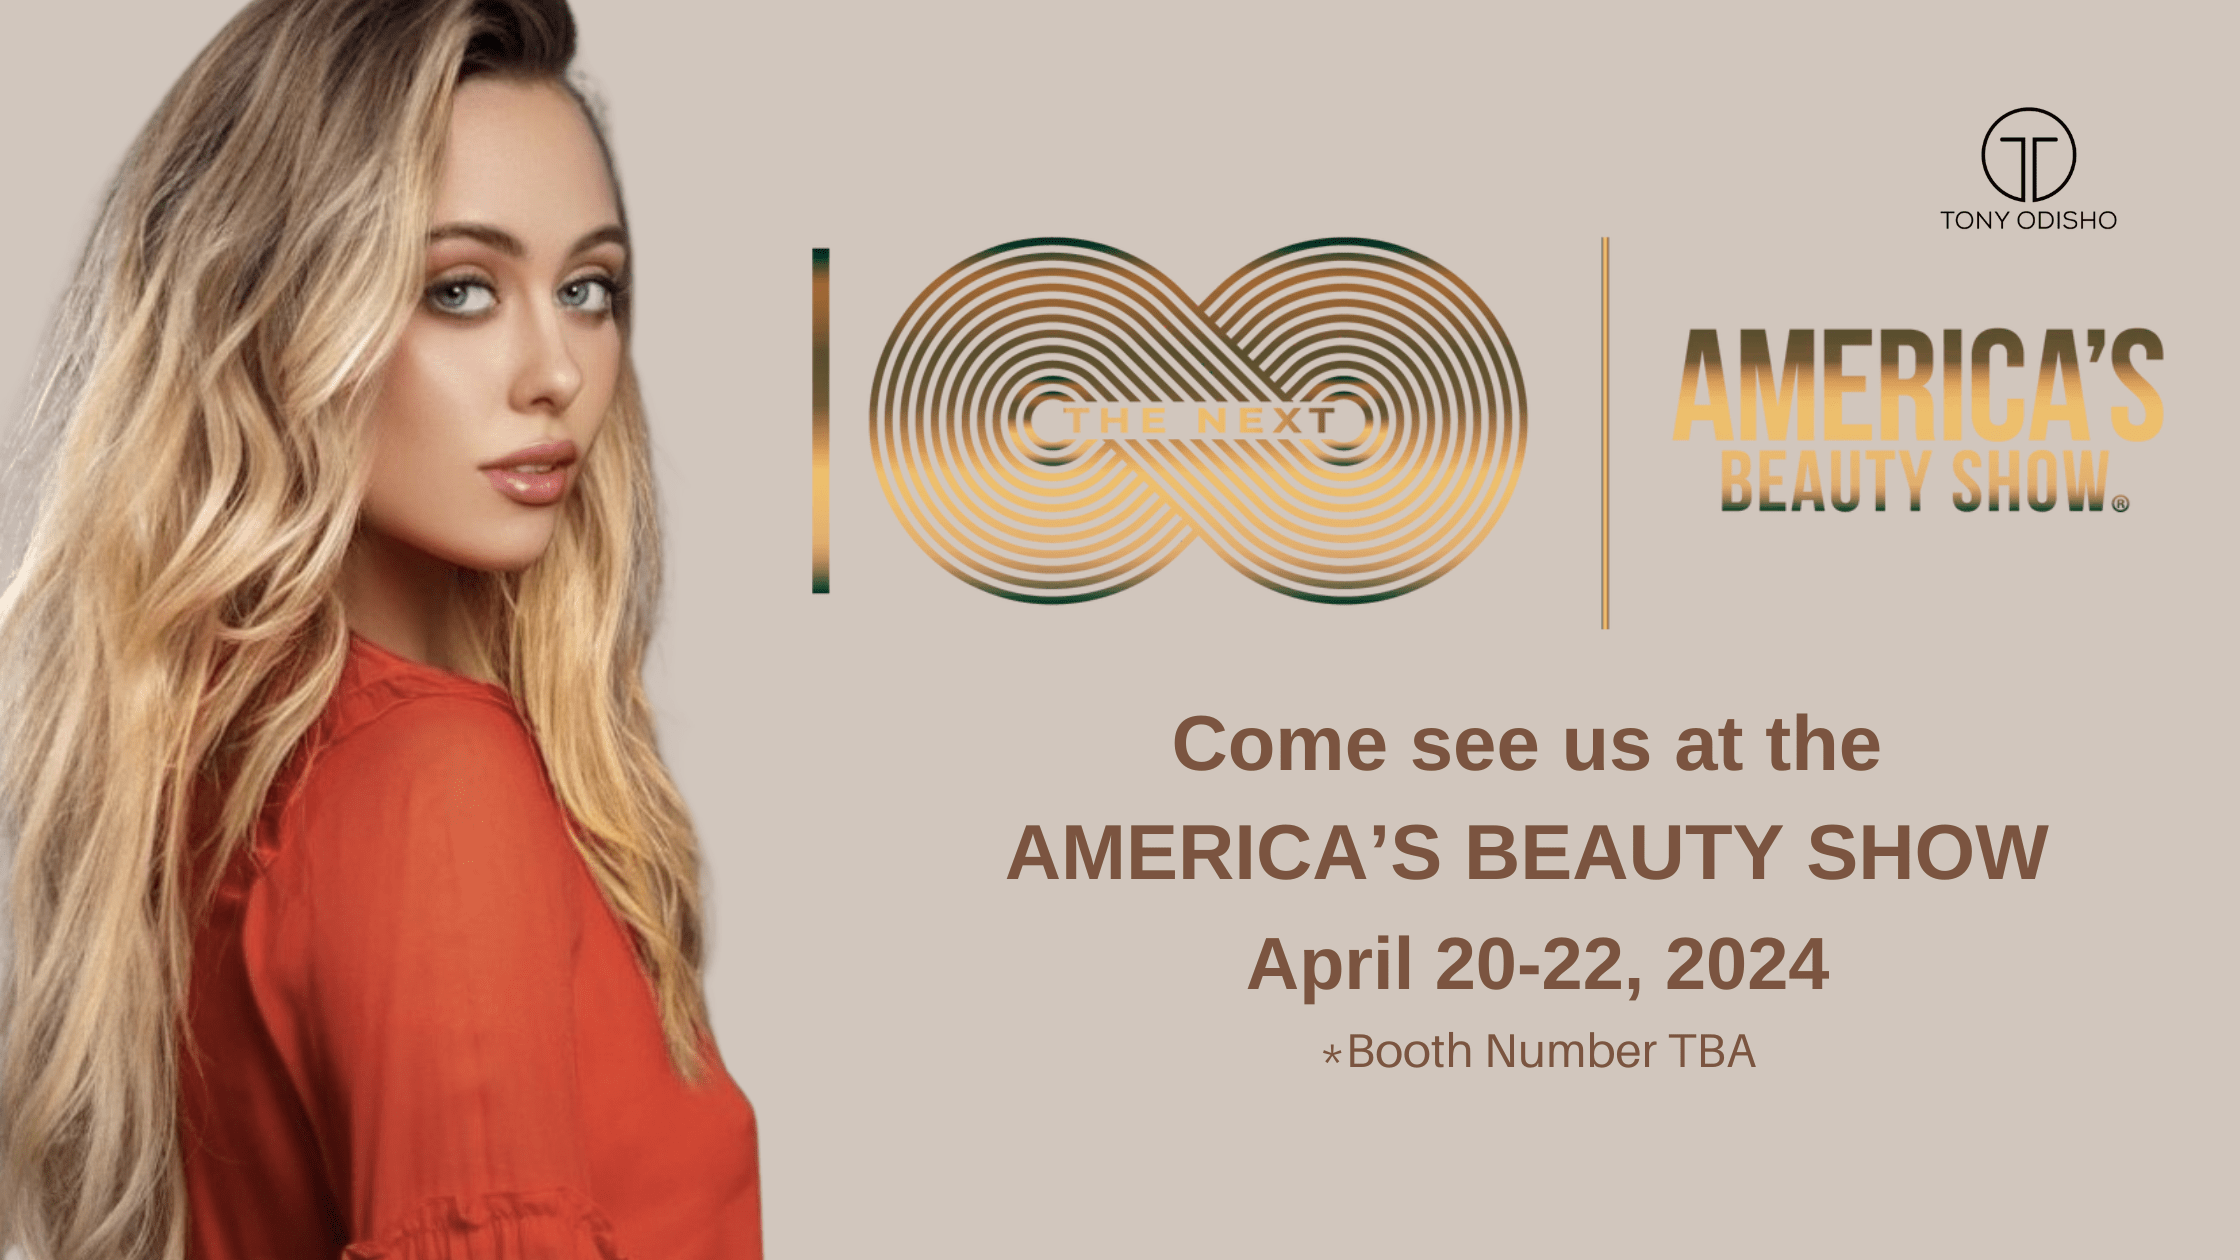 Visit us at this year's America's Beauty Show.